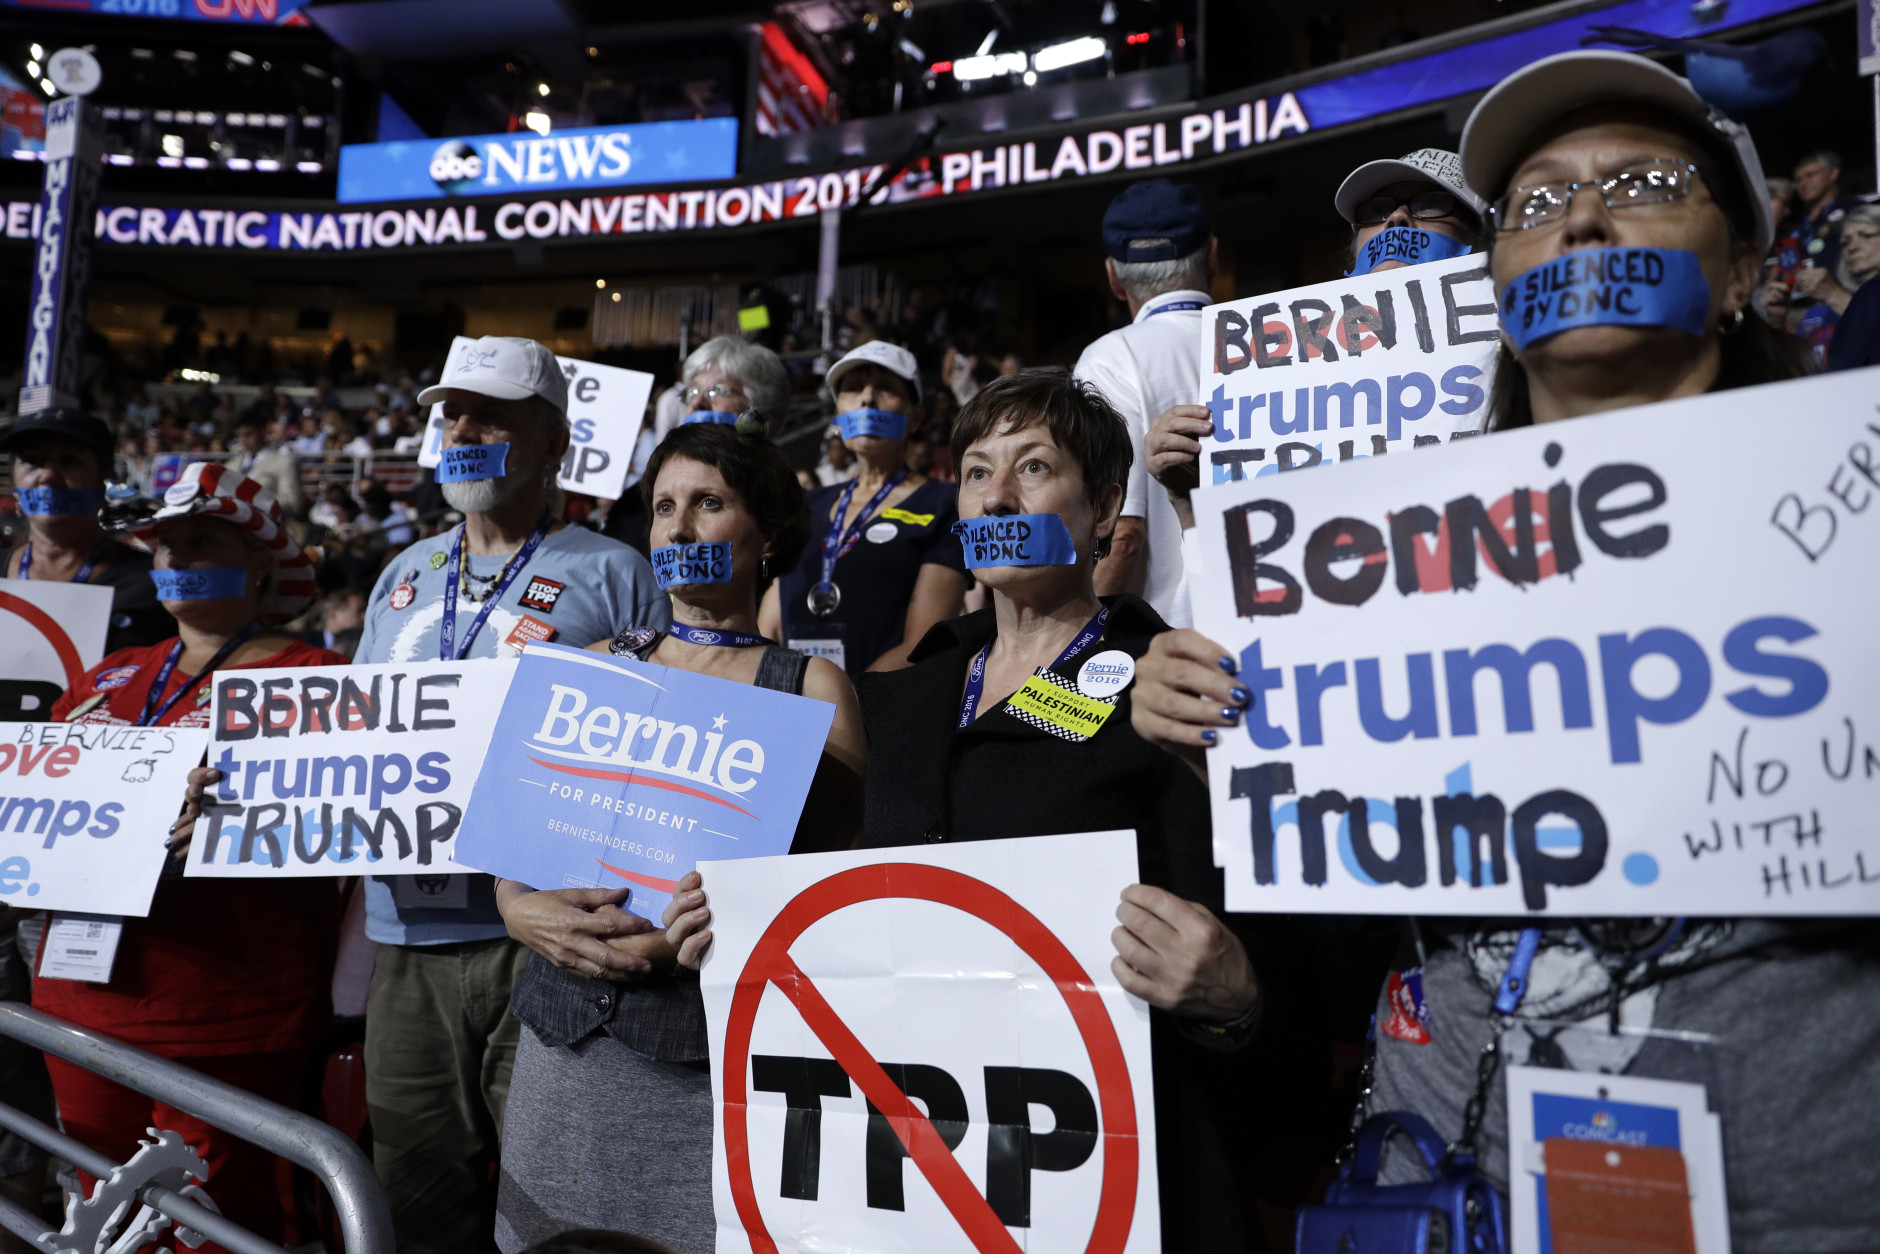 Michigan delegates wear tape covering their mouths during the first day of the Democratic National Convention in Philadelphia , Monday, July 25, 2016. (AP Photo/John Locher)